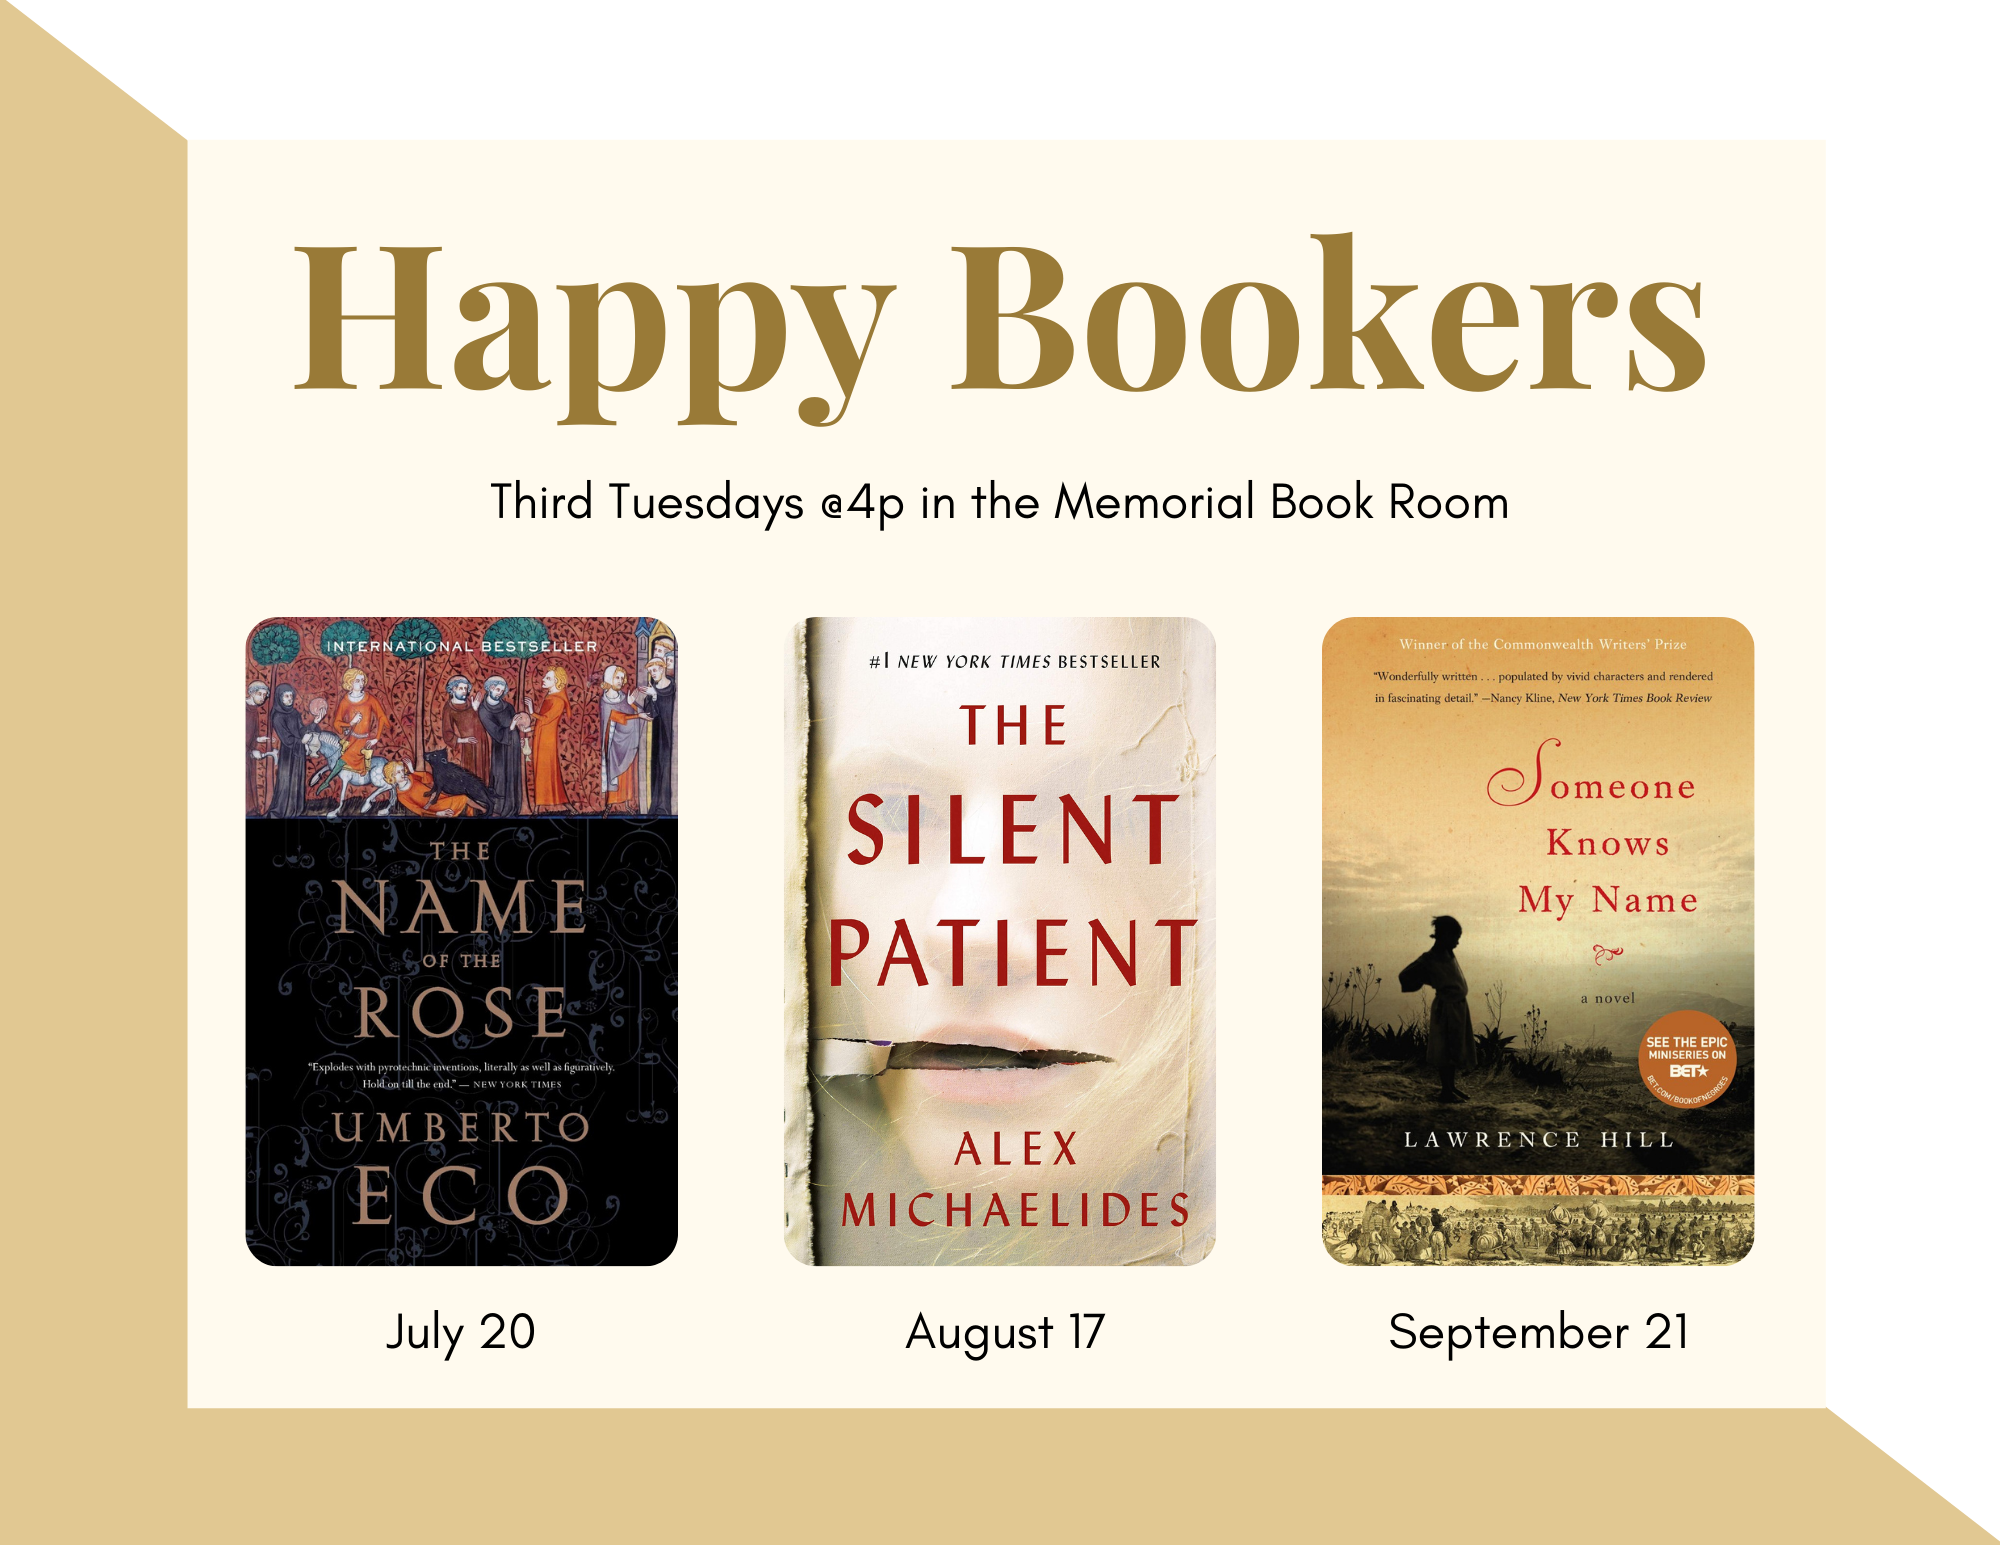 Gold text on a beige background reads "Happy Bookers" with black text below saying "Third Tuesdays @4p in the Memorial Book Room". Below are images of the covers of the books The Name of the Rose, The Silent Patient, and Someone Knows My Name with the dates July 20, August 17, and September 21 listed respectively below each.